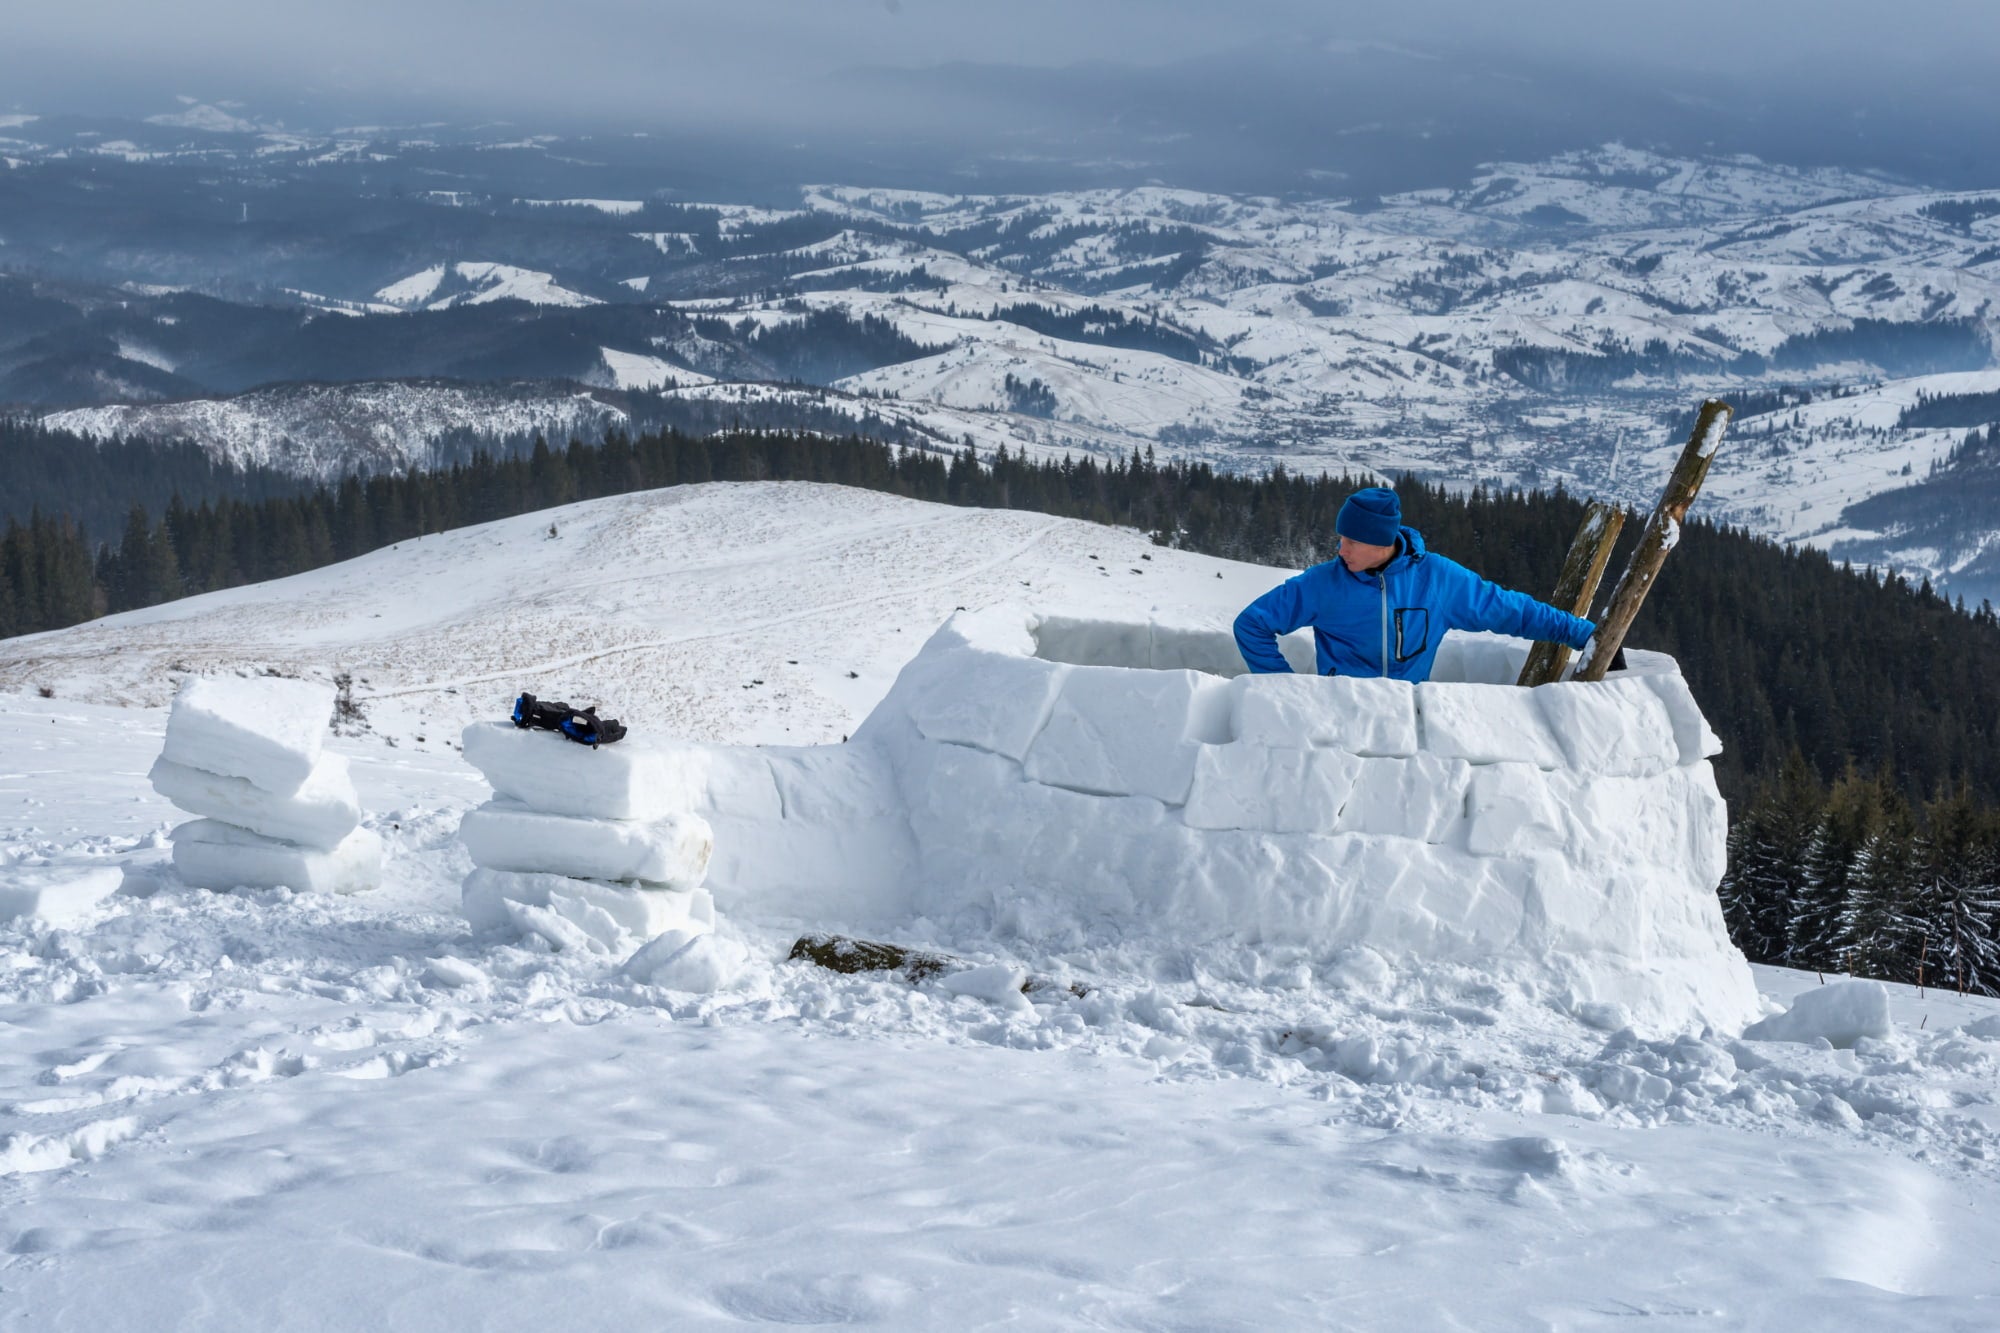 a man inside a half-built igloo on a snowy hill in the mountains